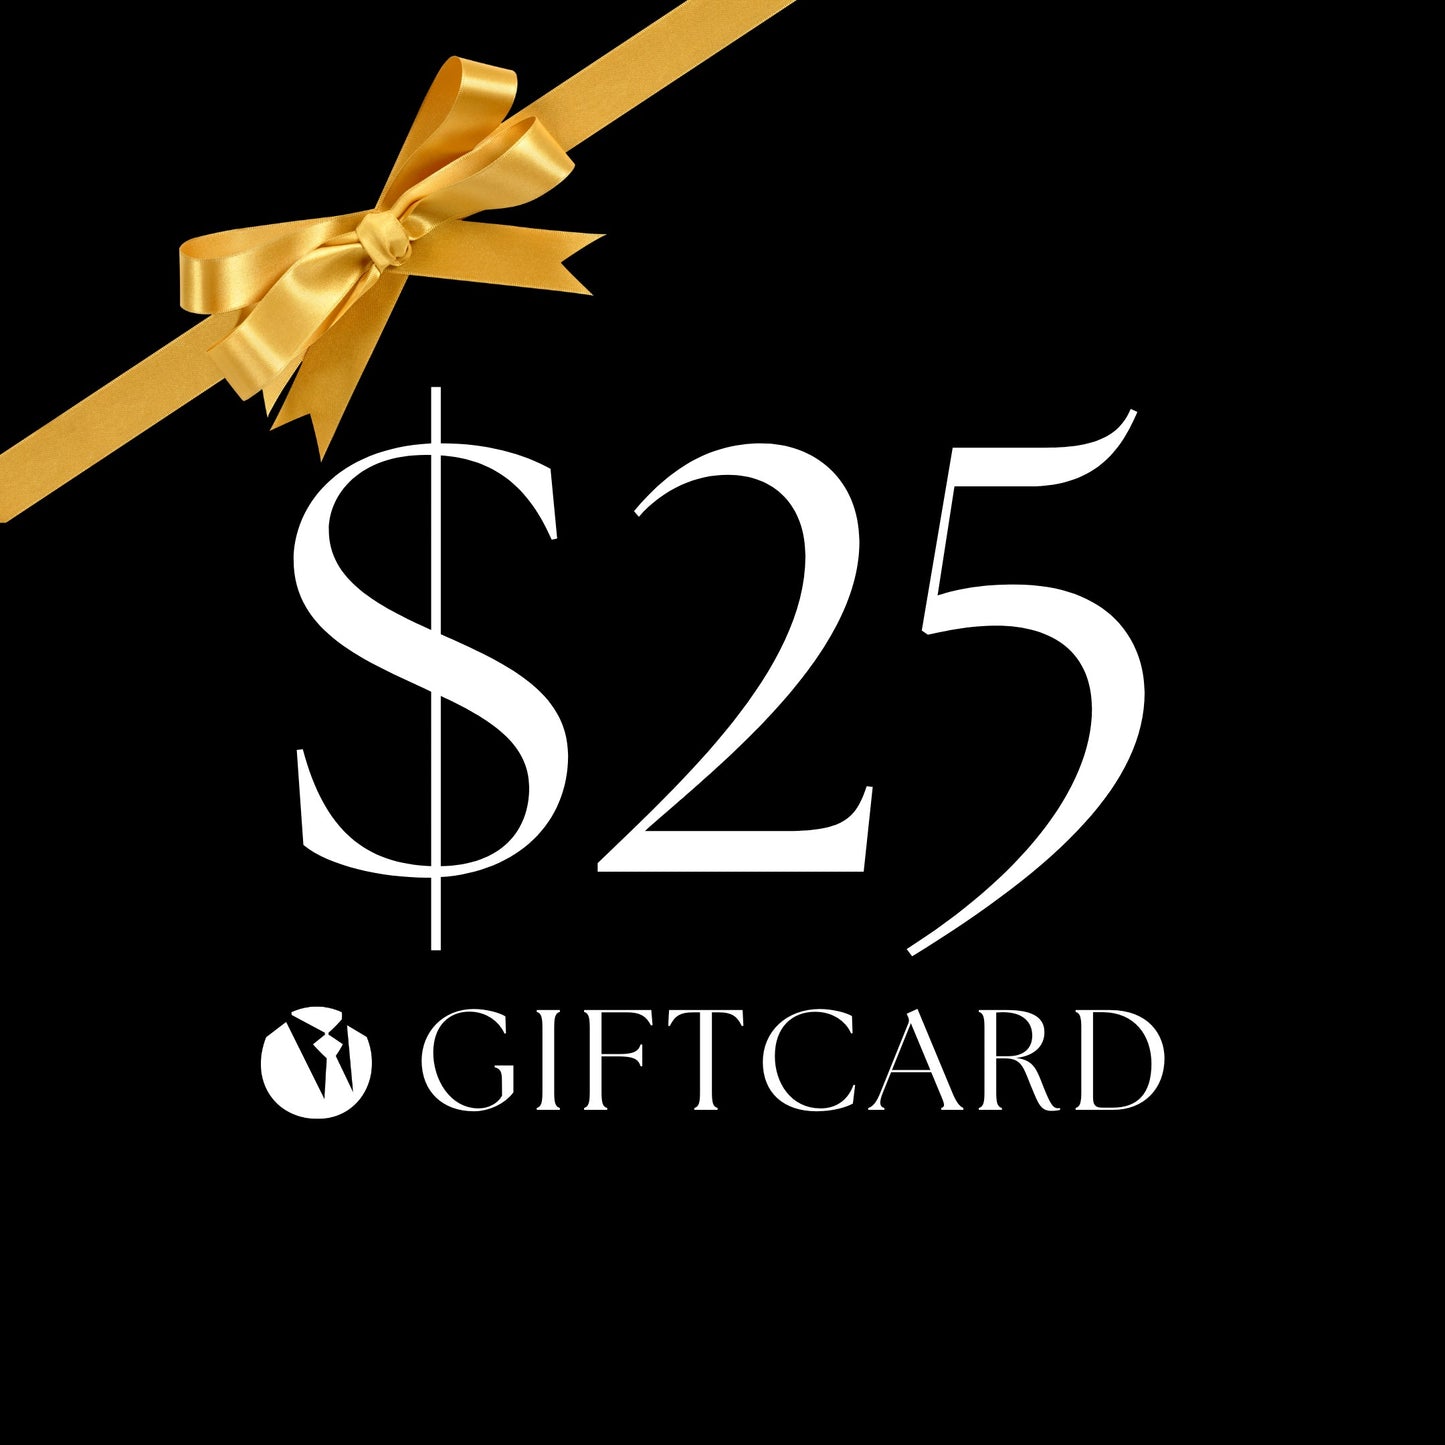 Suits 2 U Gift Card